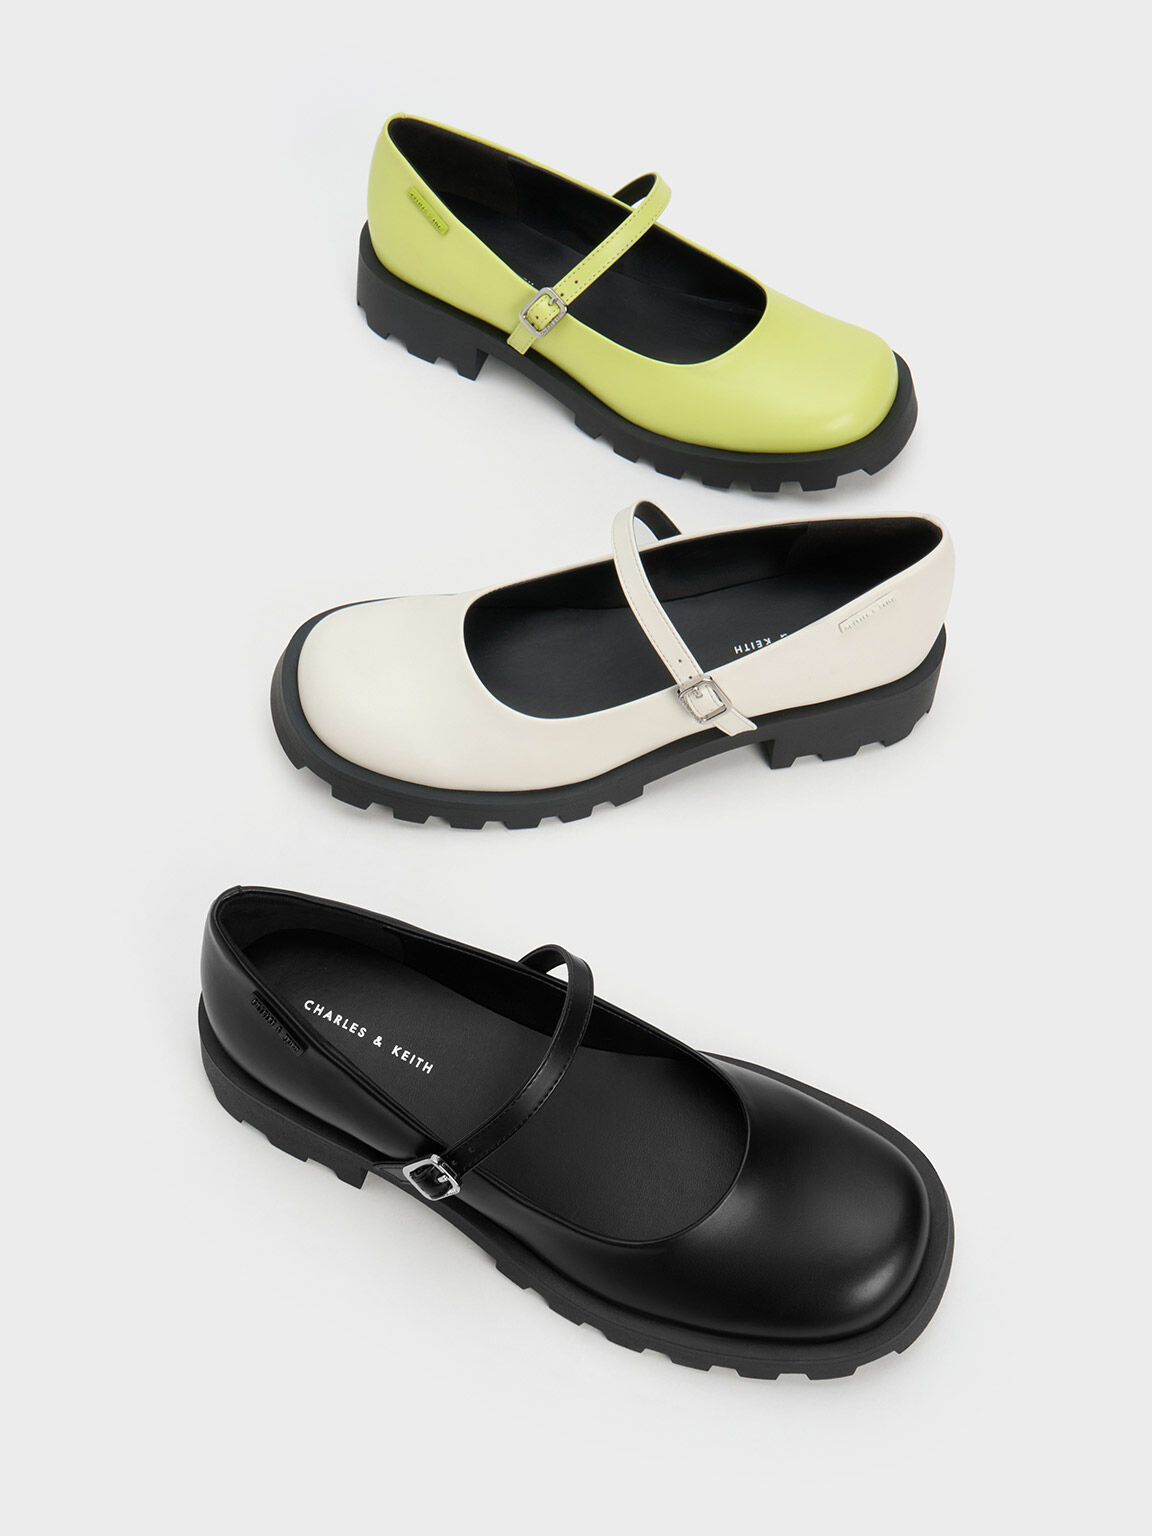 Rounded Square-Toe Mary Janes, Black, hi-res